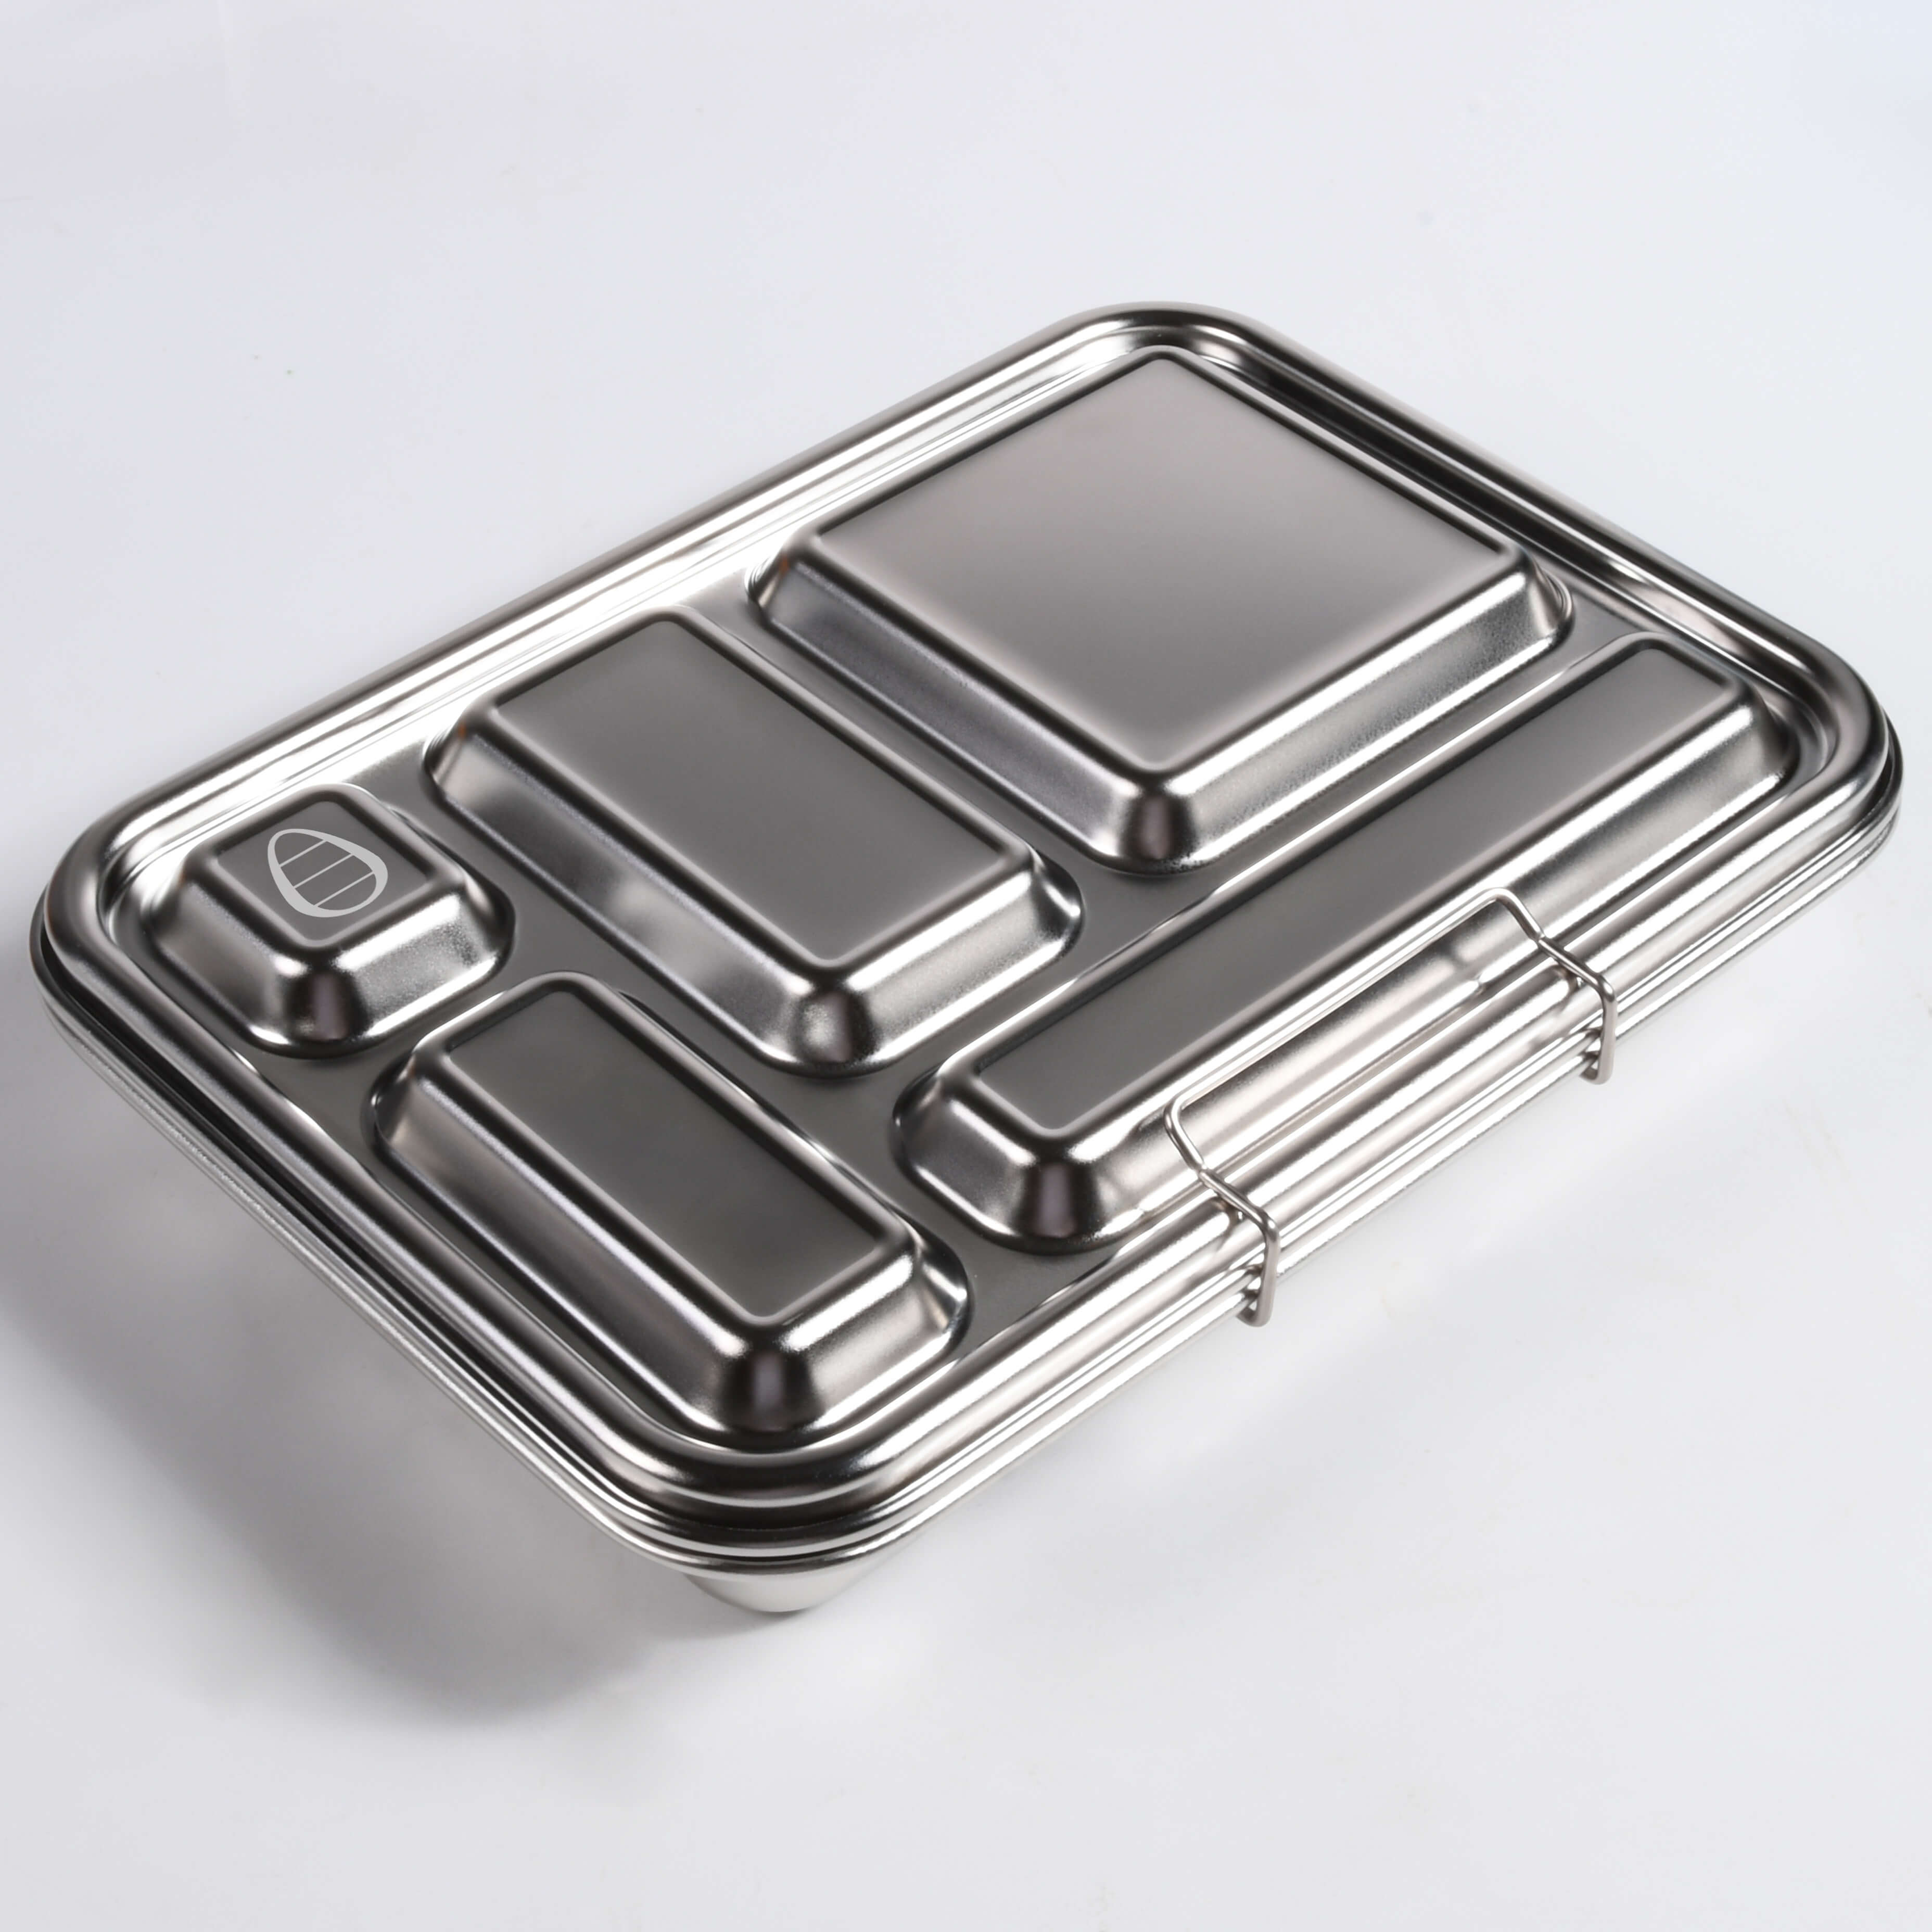 Lecone Stainless Steel Bento Box 5 Compartments Big Kids Lunch Box Large  Insulated Leak Proof Bento Boxes Portable Food Container for Adults Work or